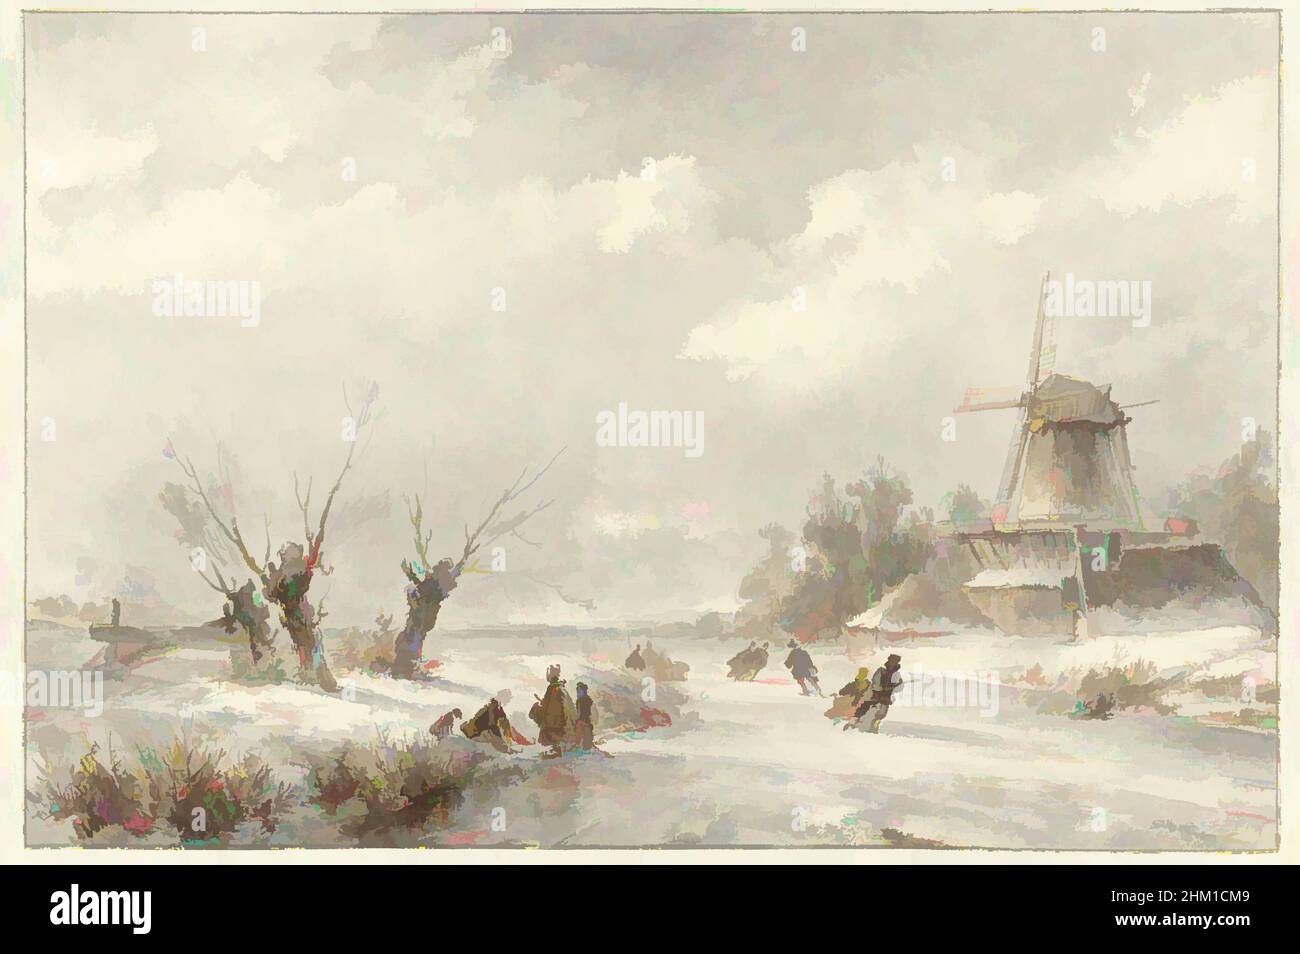 Art inspired by Winter landscape with water striders by a windmill, draughtsman: Lodewijk Johannes Kleijn, 1827 - 1897, paper, pencil, brush, height 209 mm × width 313 mm, Classic works modernized by Artotop with a splash of modernity. Shapes, color and value, eye-catching visual impact on art. Emotions through freedom of artworks in a contemporary way. A timeless message pursuing a wildly creative new direction. Artists turning to the digital medium and creating the Artotop NFT Stock Photo